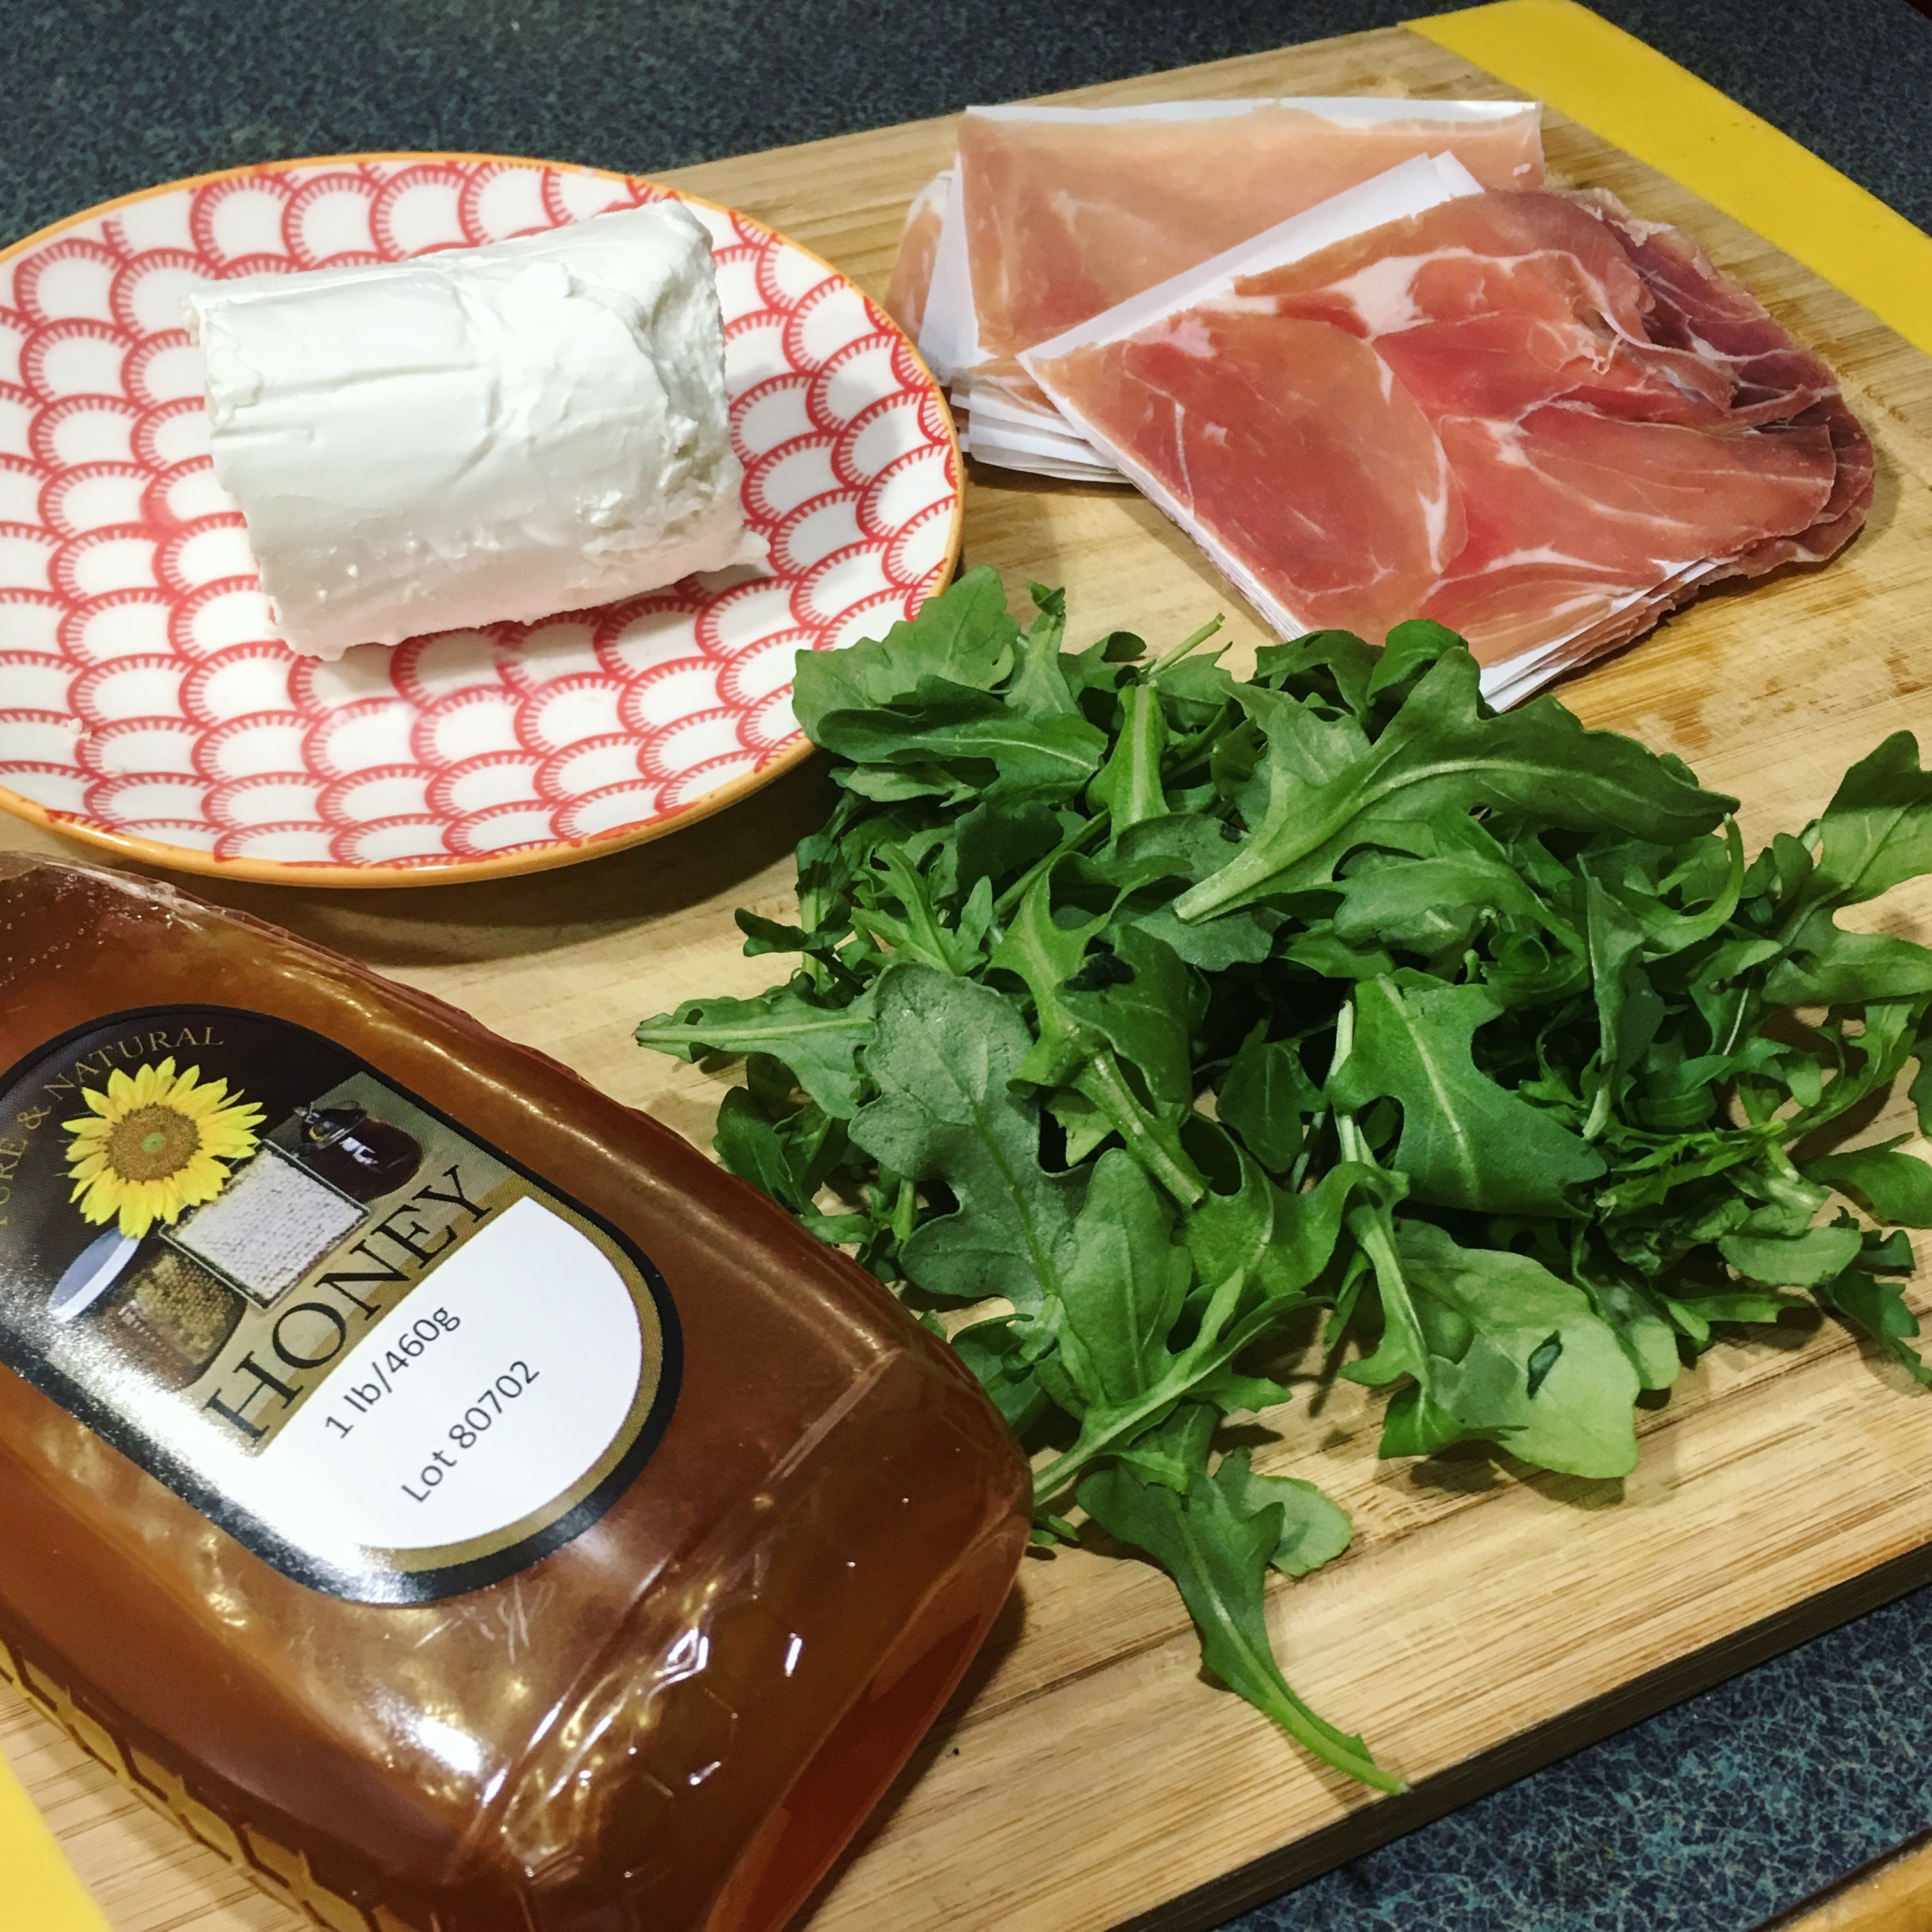 Ingredients for Goat Cheese Prosciutto Crostini